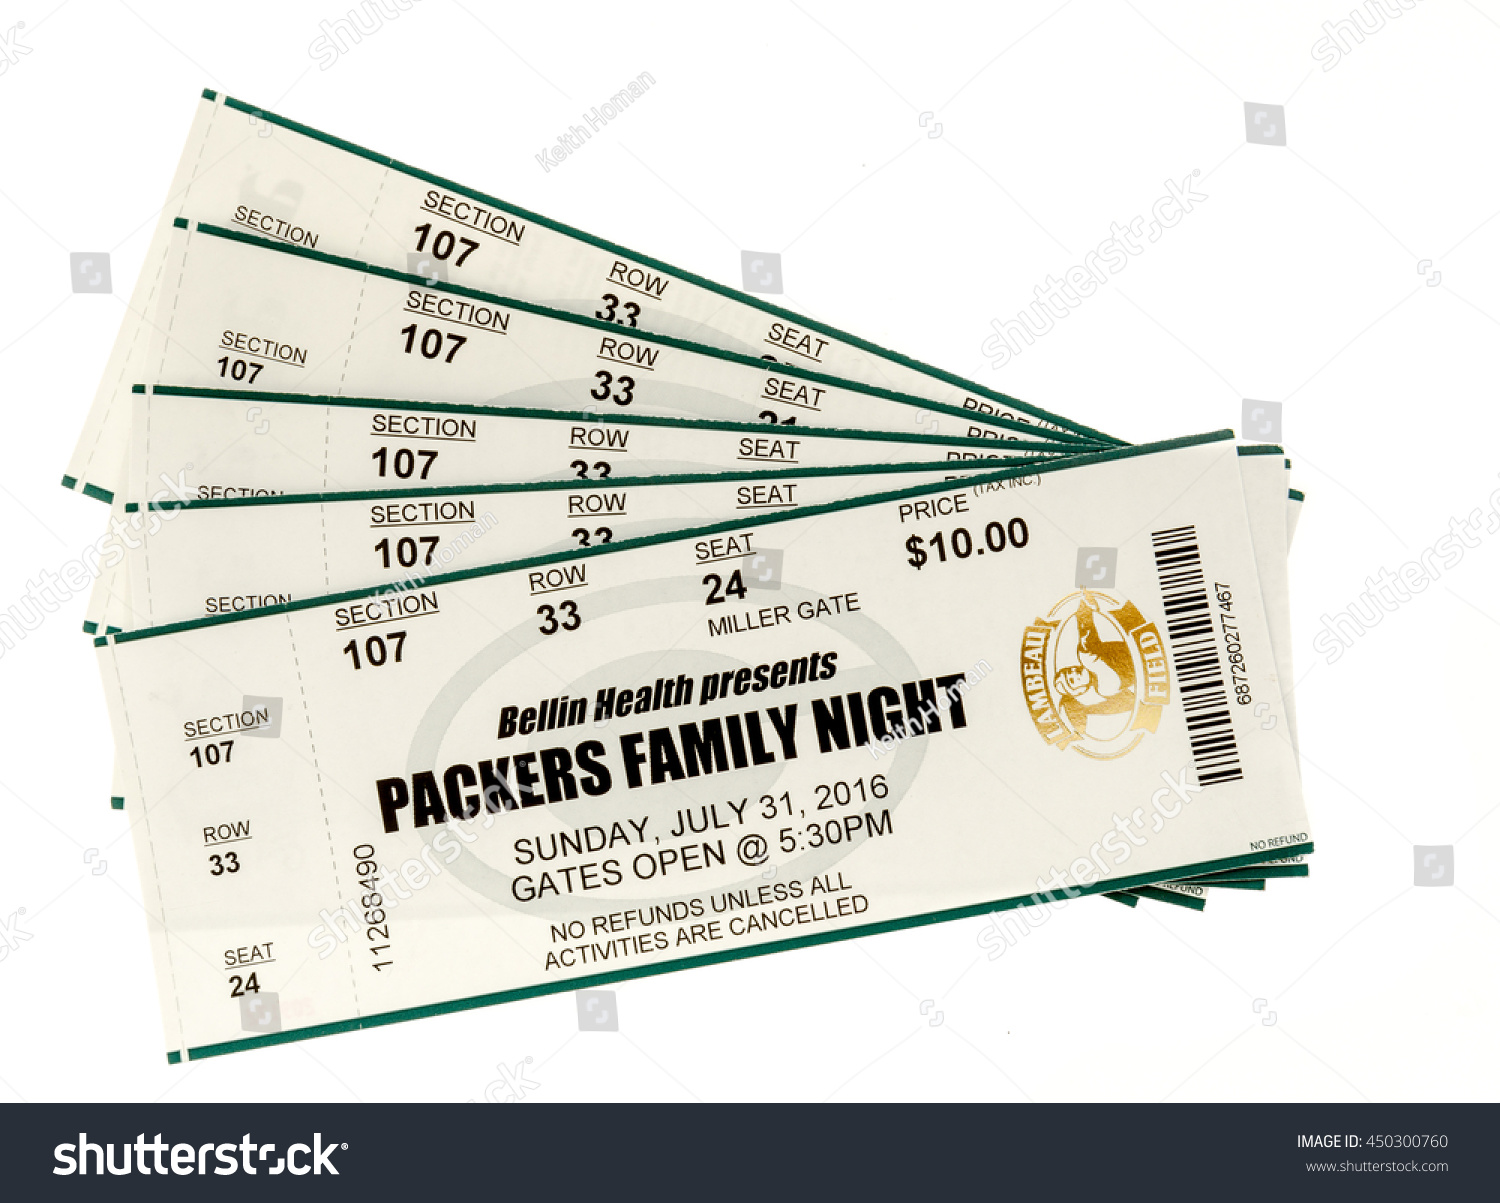 534 Green bay packers Images, Stock Photos & Vectors Shutterstock